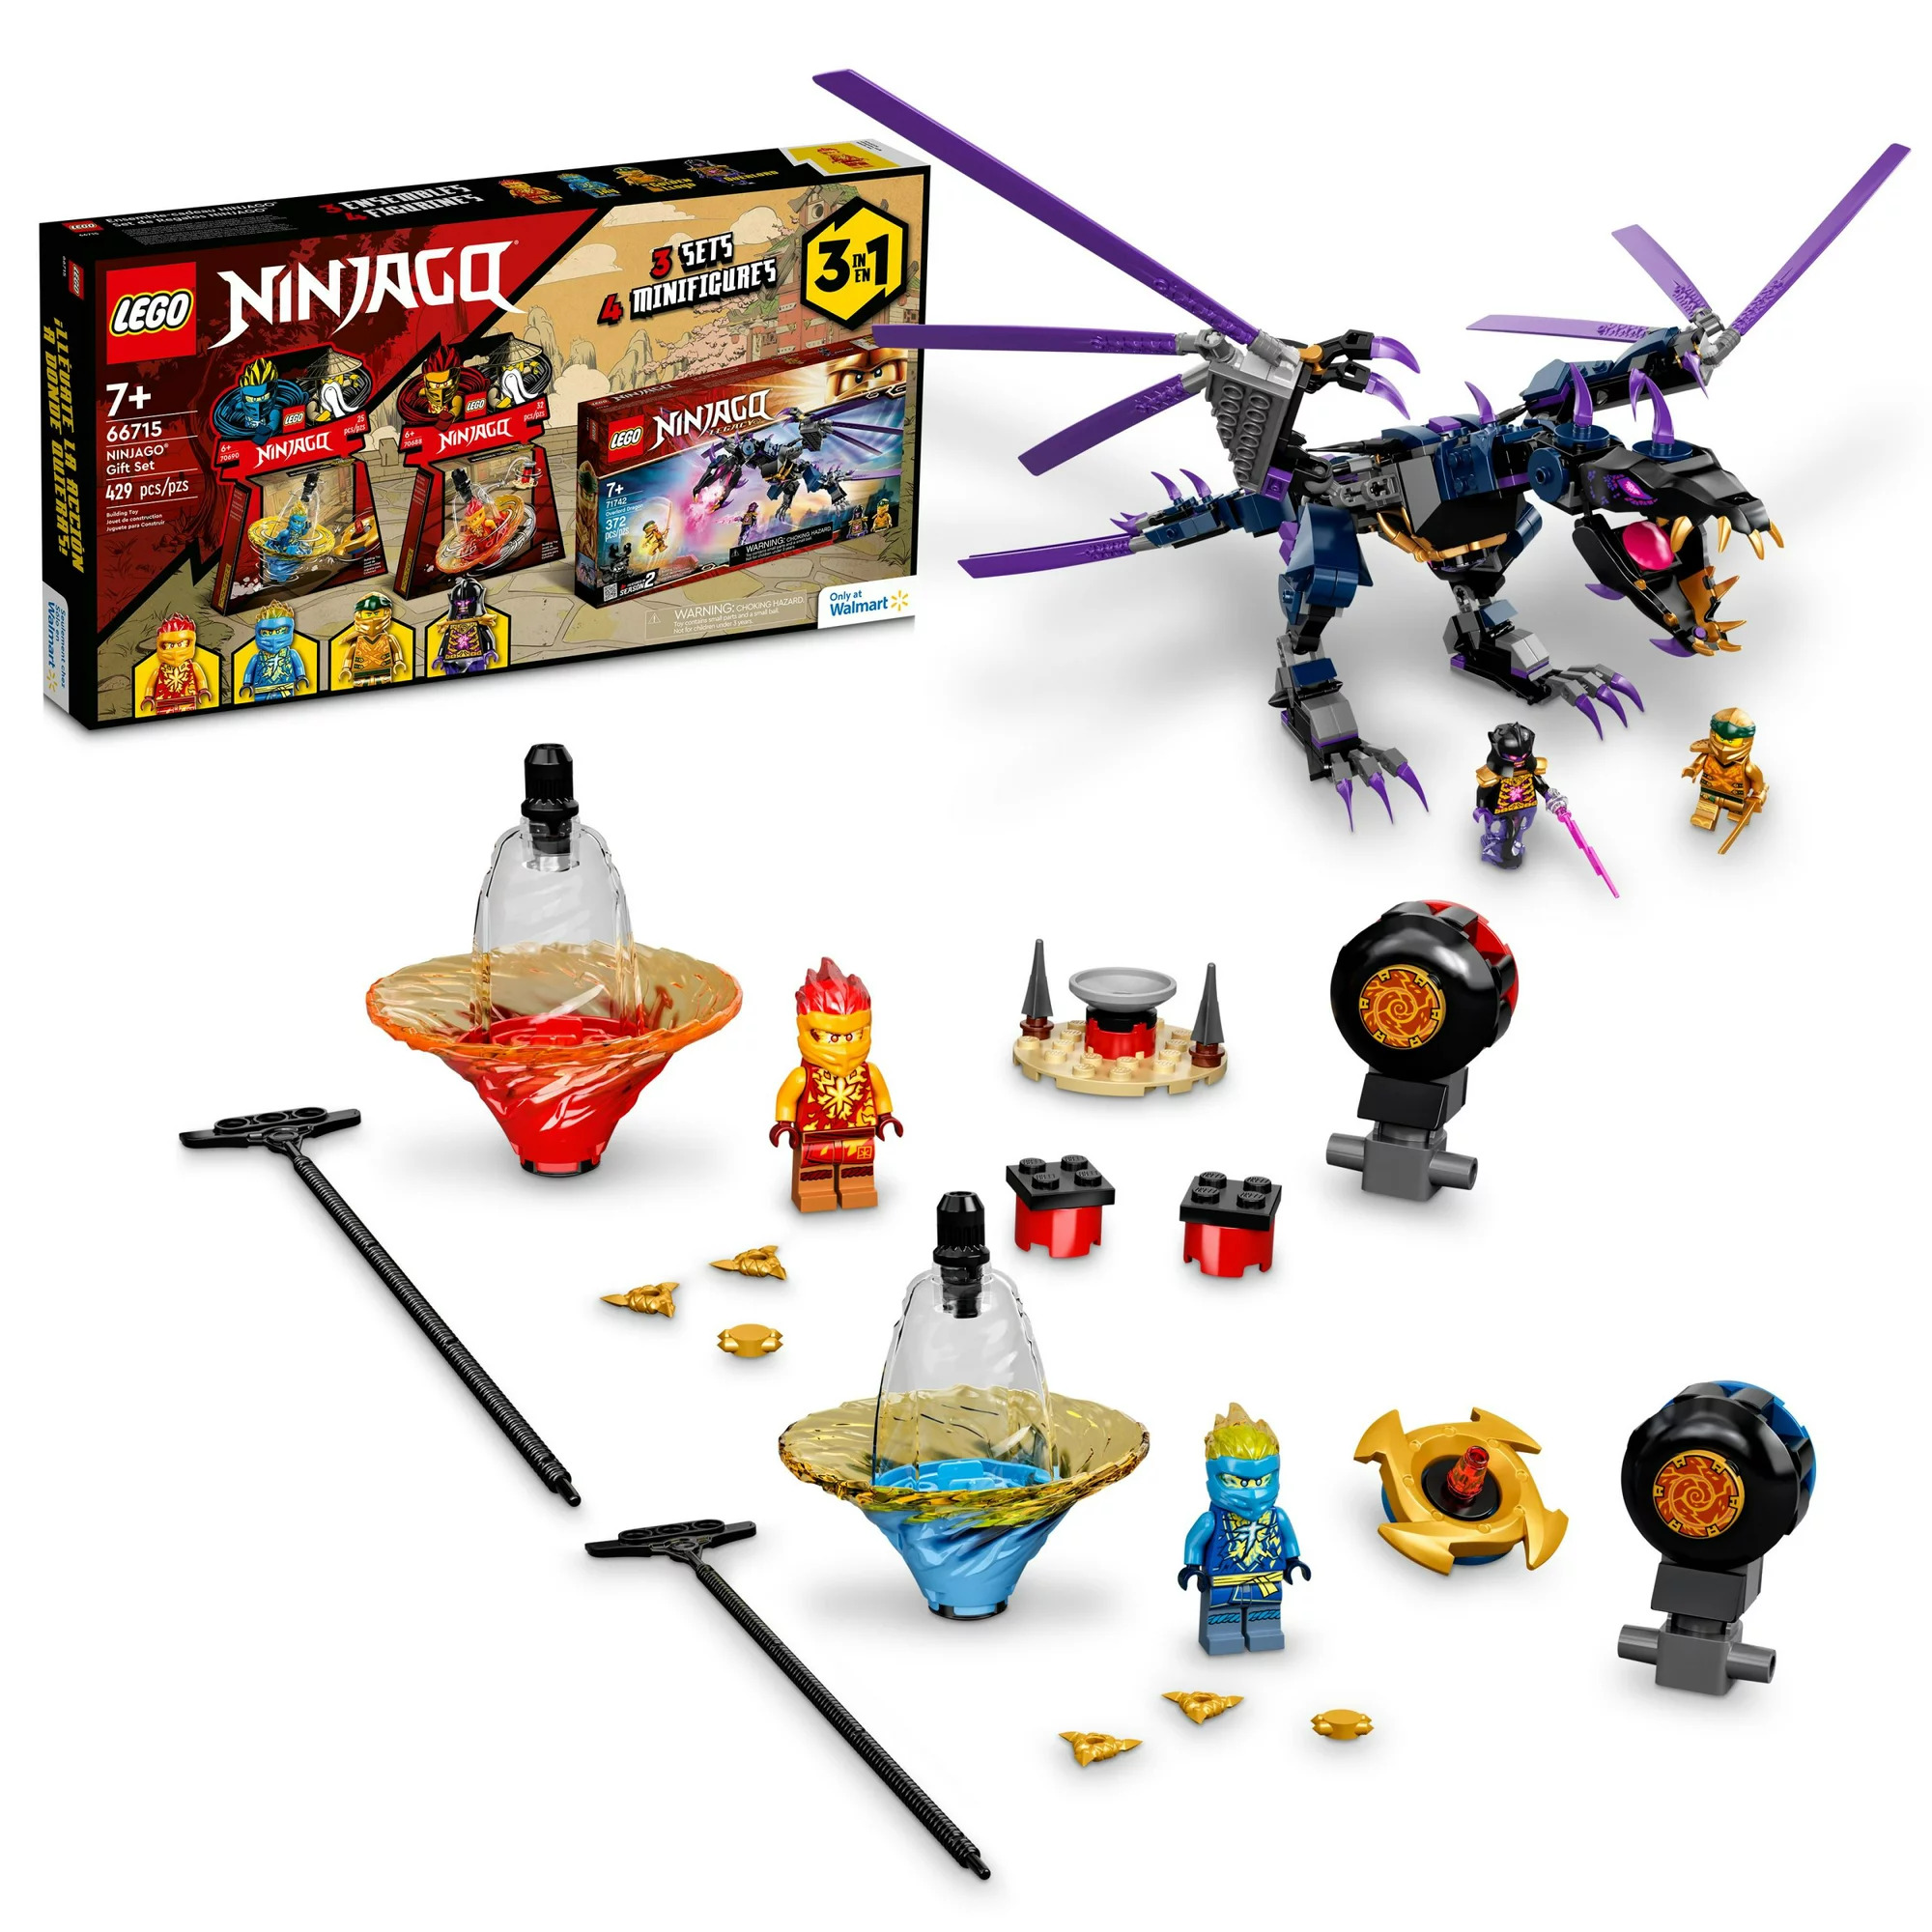 LEGO Ninjago 66715 Building Toy Gift Set Limited Edition For Kids, Boys, and Girls (429 pieces)